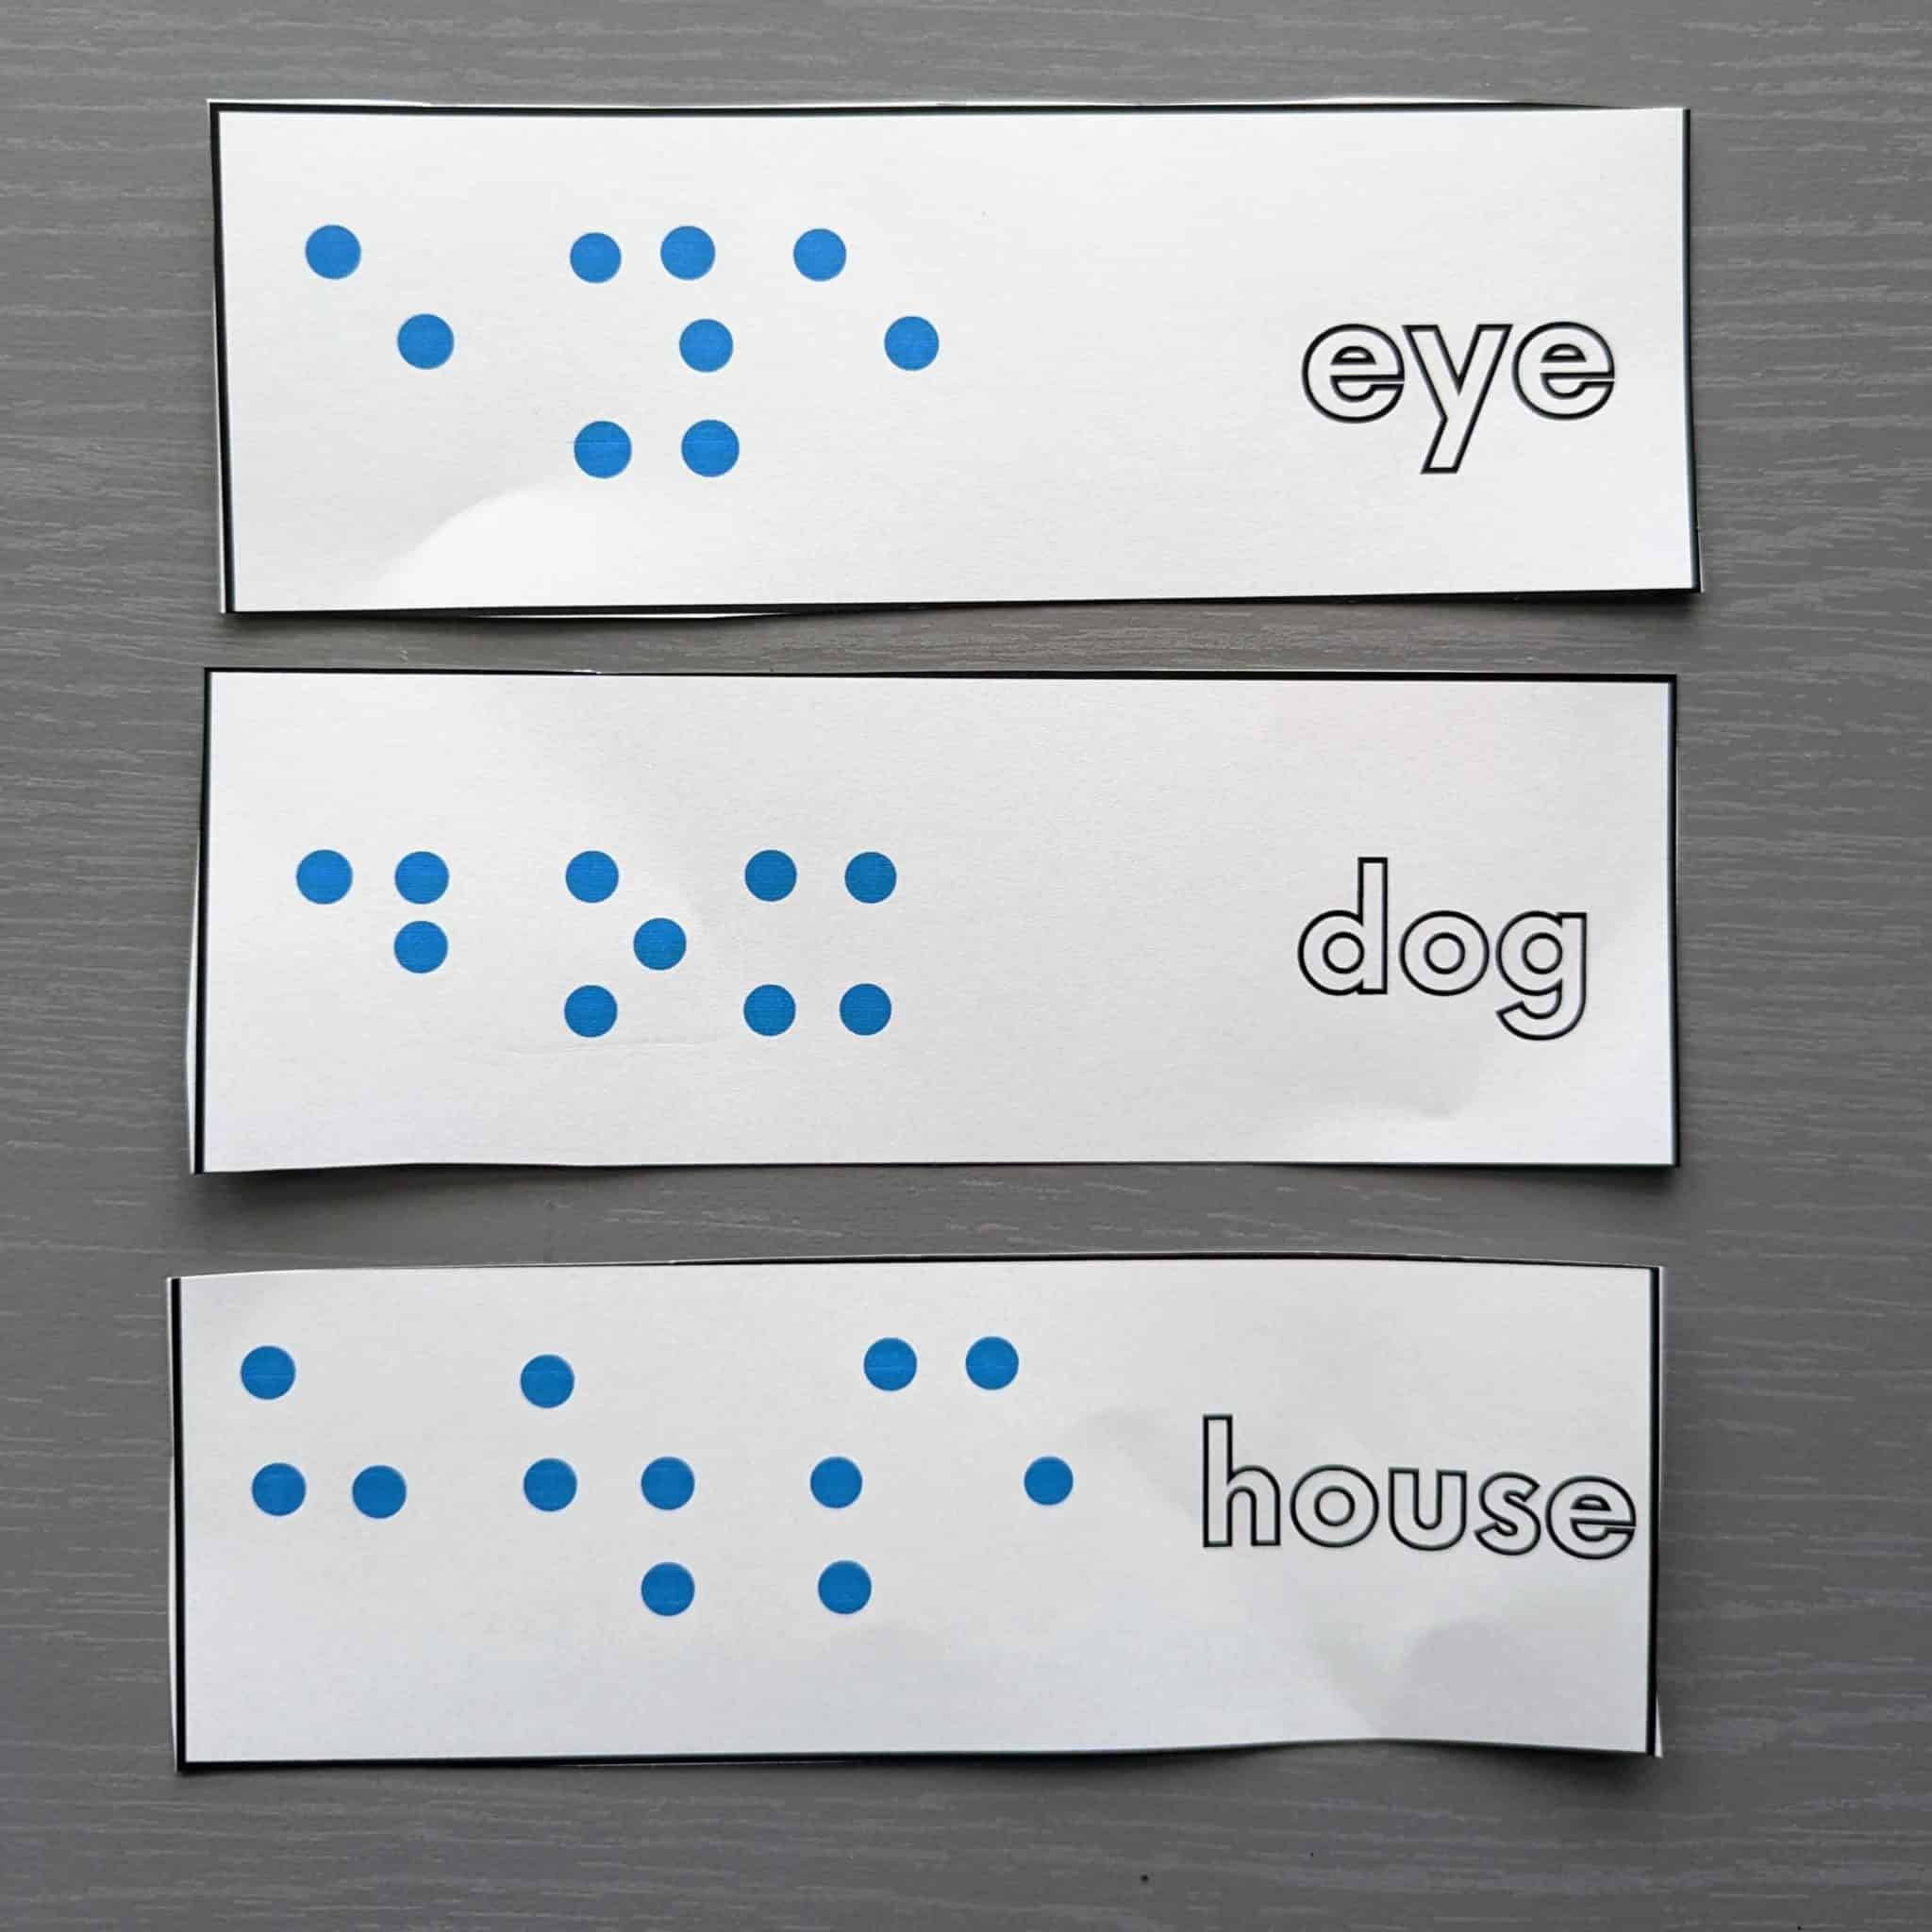 braille activity for sighted students cut out the braille card templates